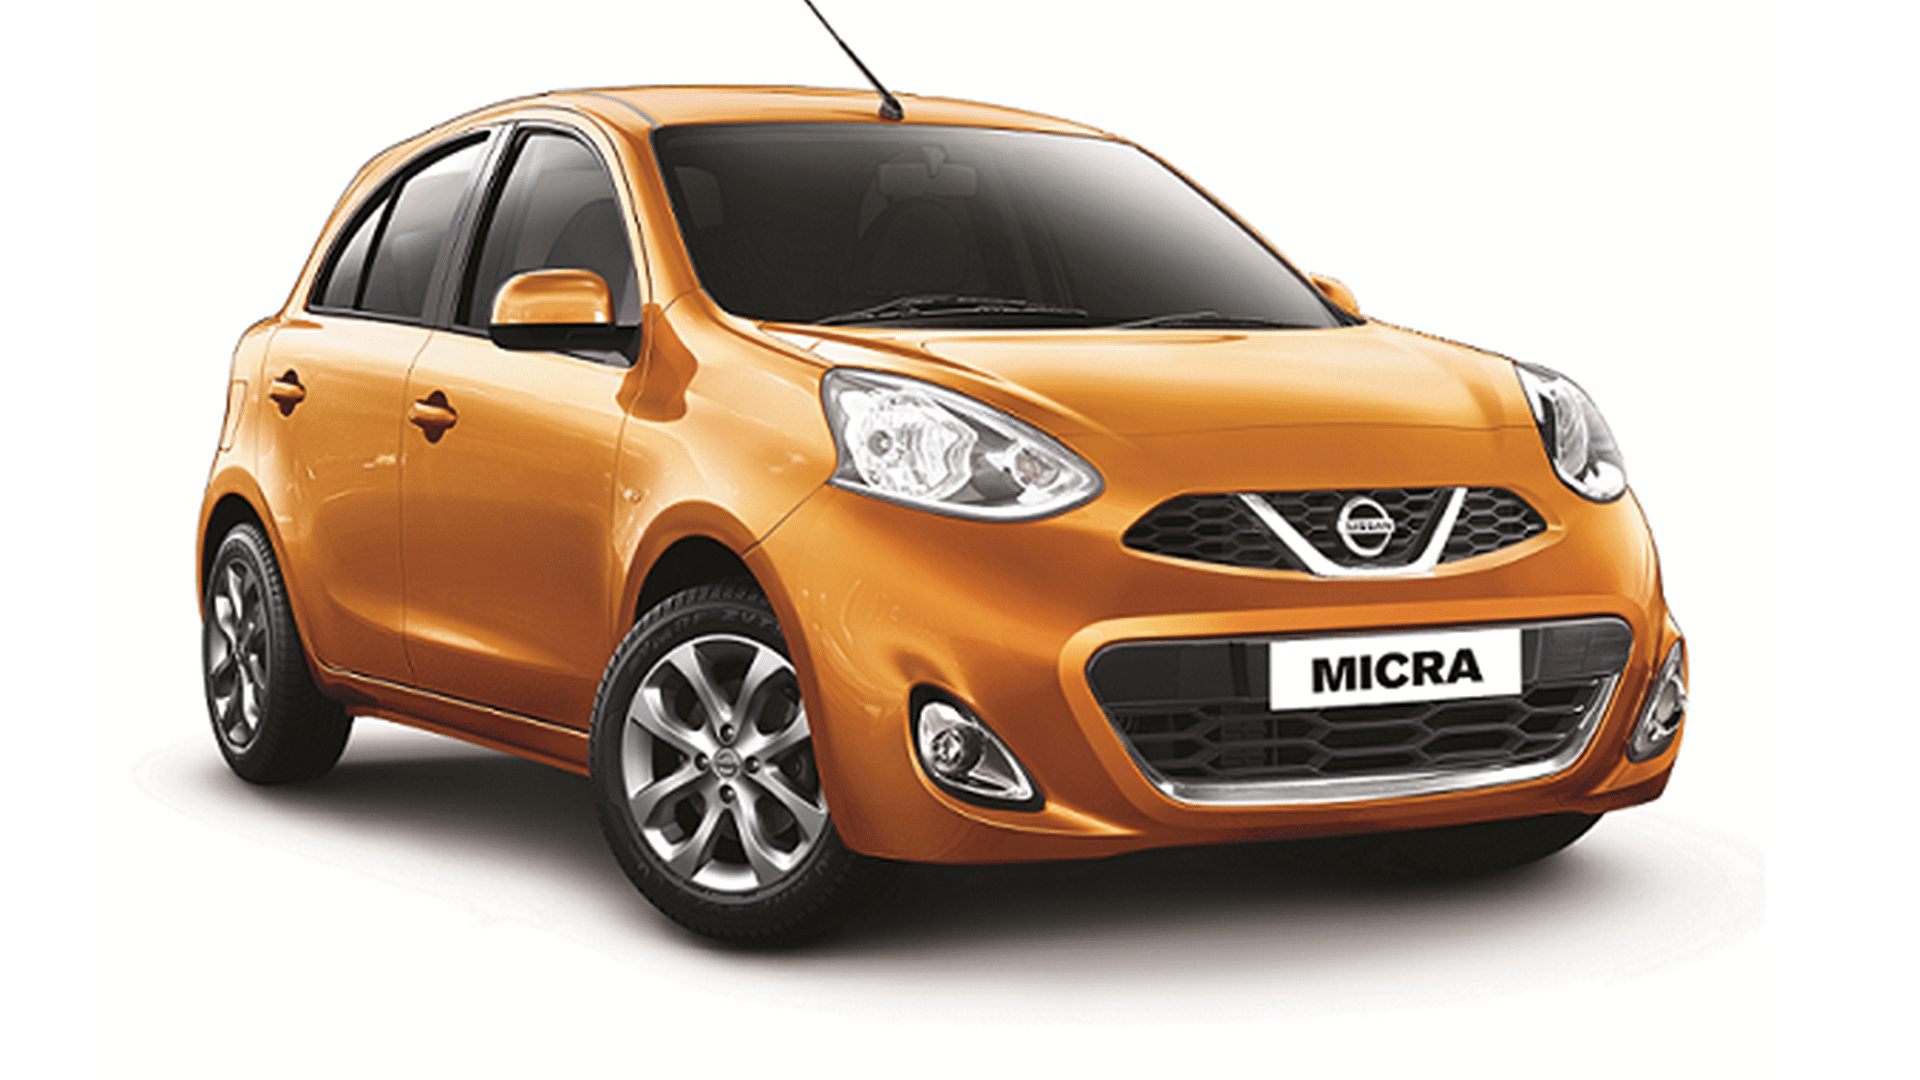 New Nissan Micra facelifted. (Photo Courtesy: Nissan)